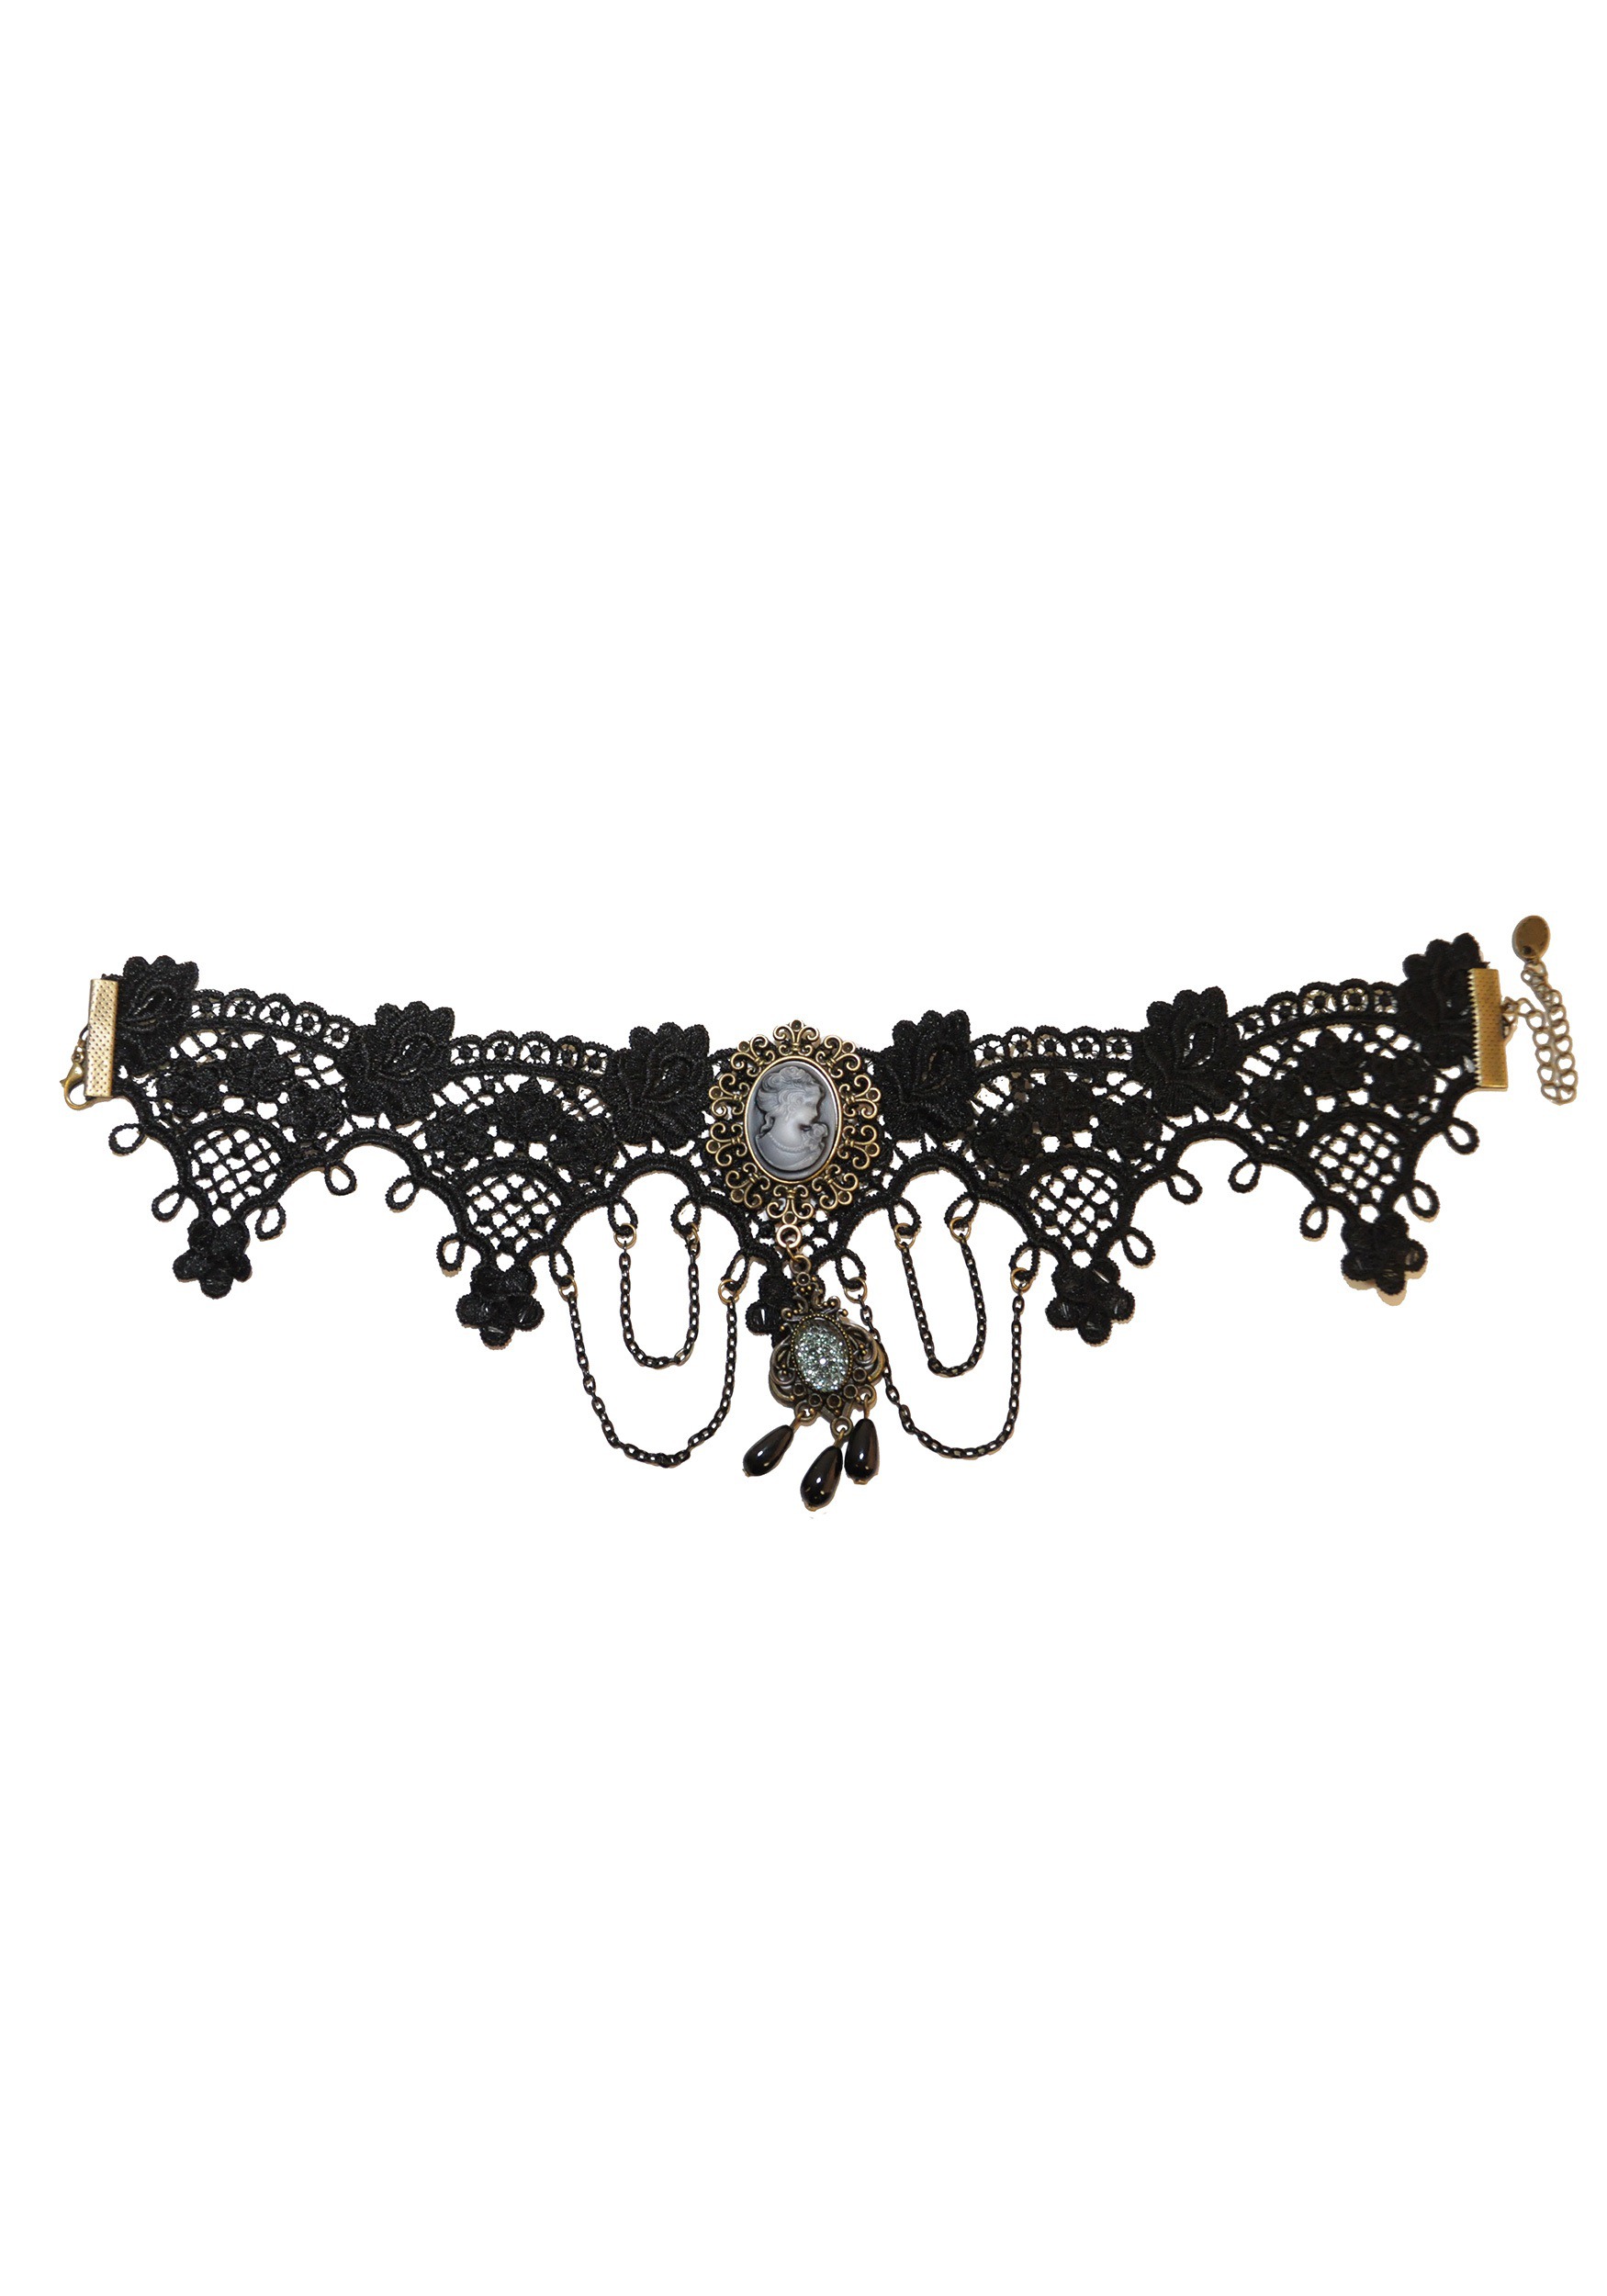 Gothic Black Lace Choker Collection 14